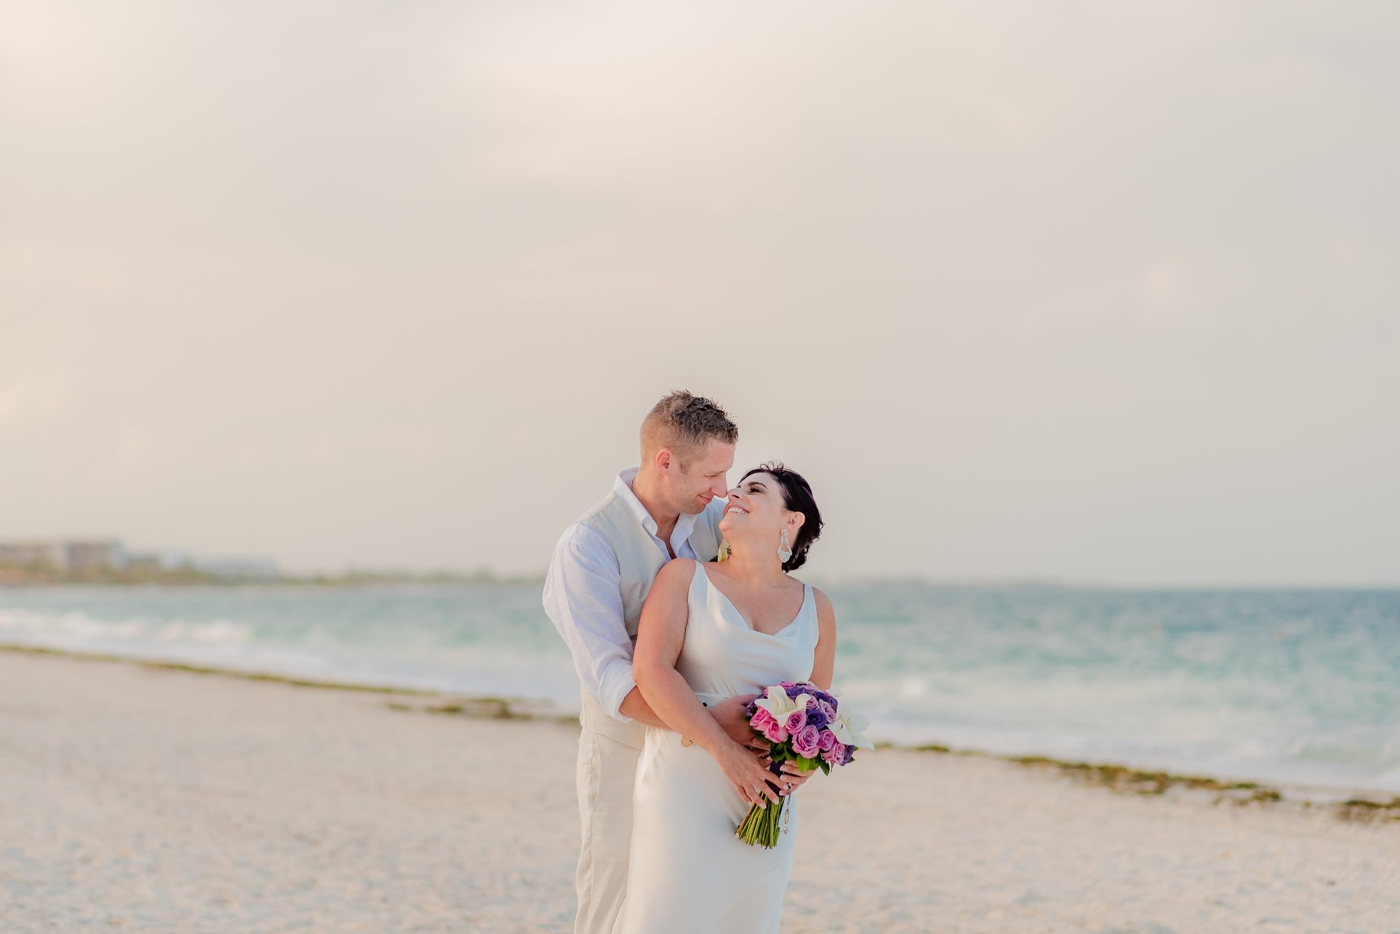 Bride and groom portraits on the beach in Mexico